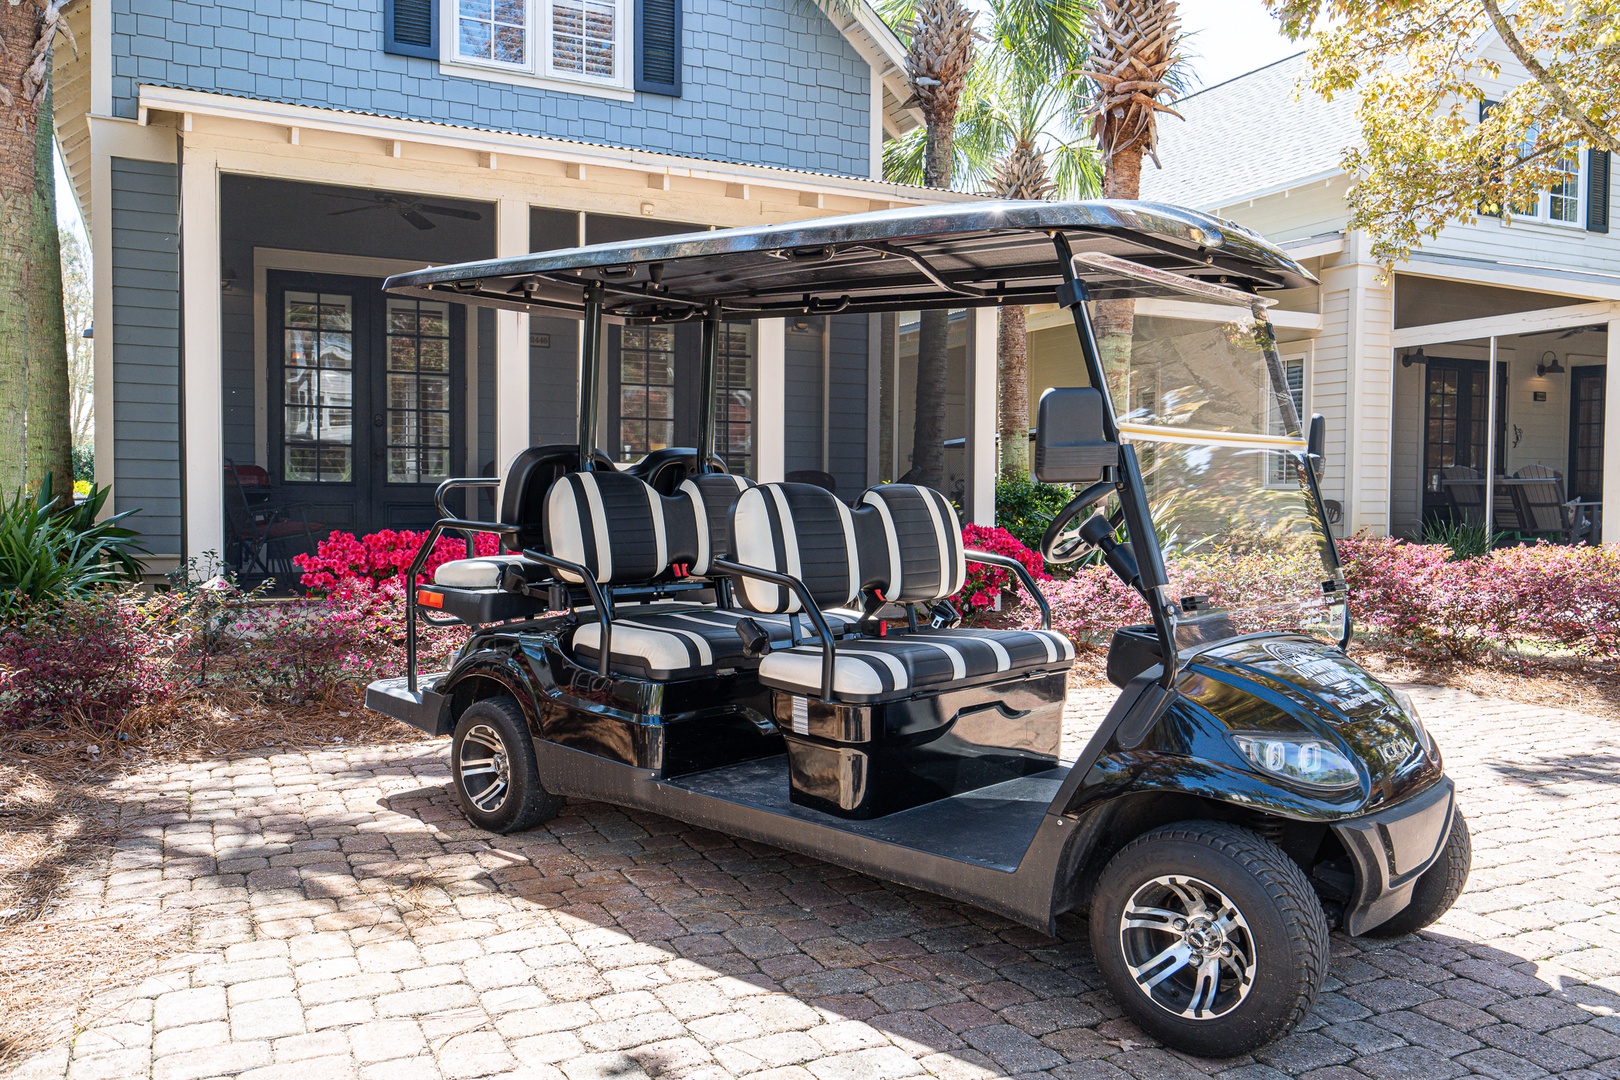 Zip around this exceptional community in your very own golf cart